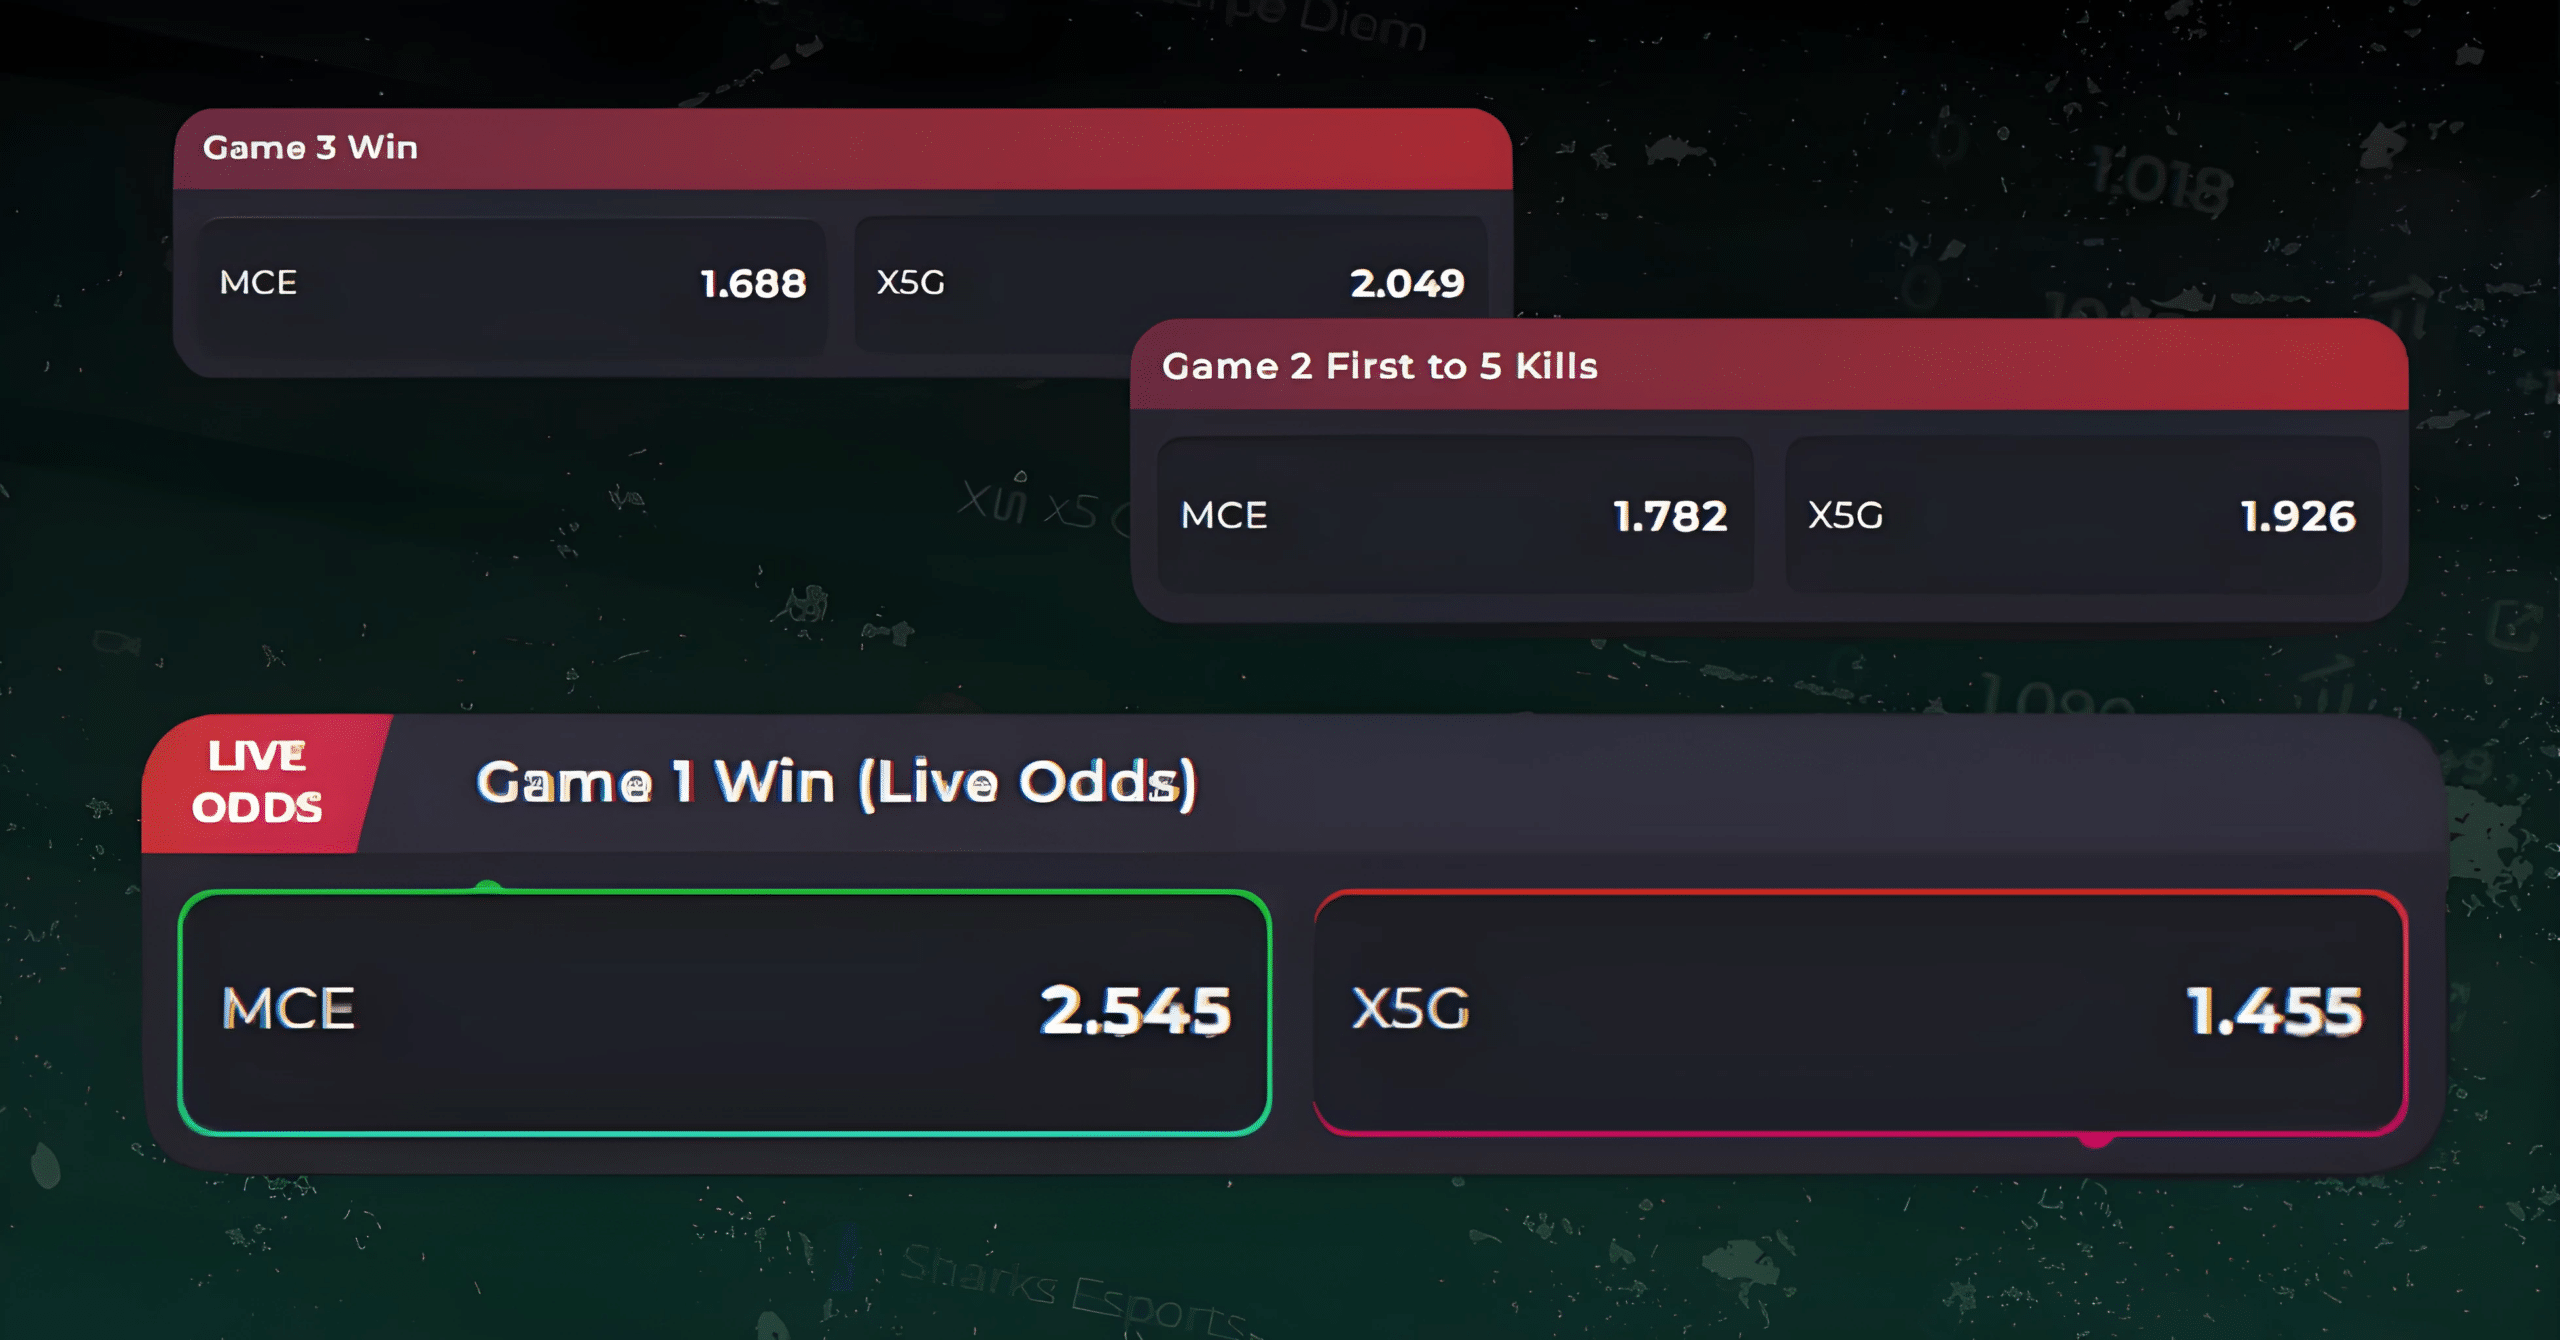 Esports betting types of bets showing game odds, match winners, etc.